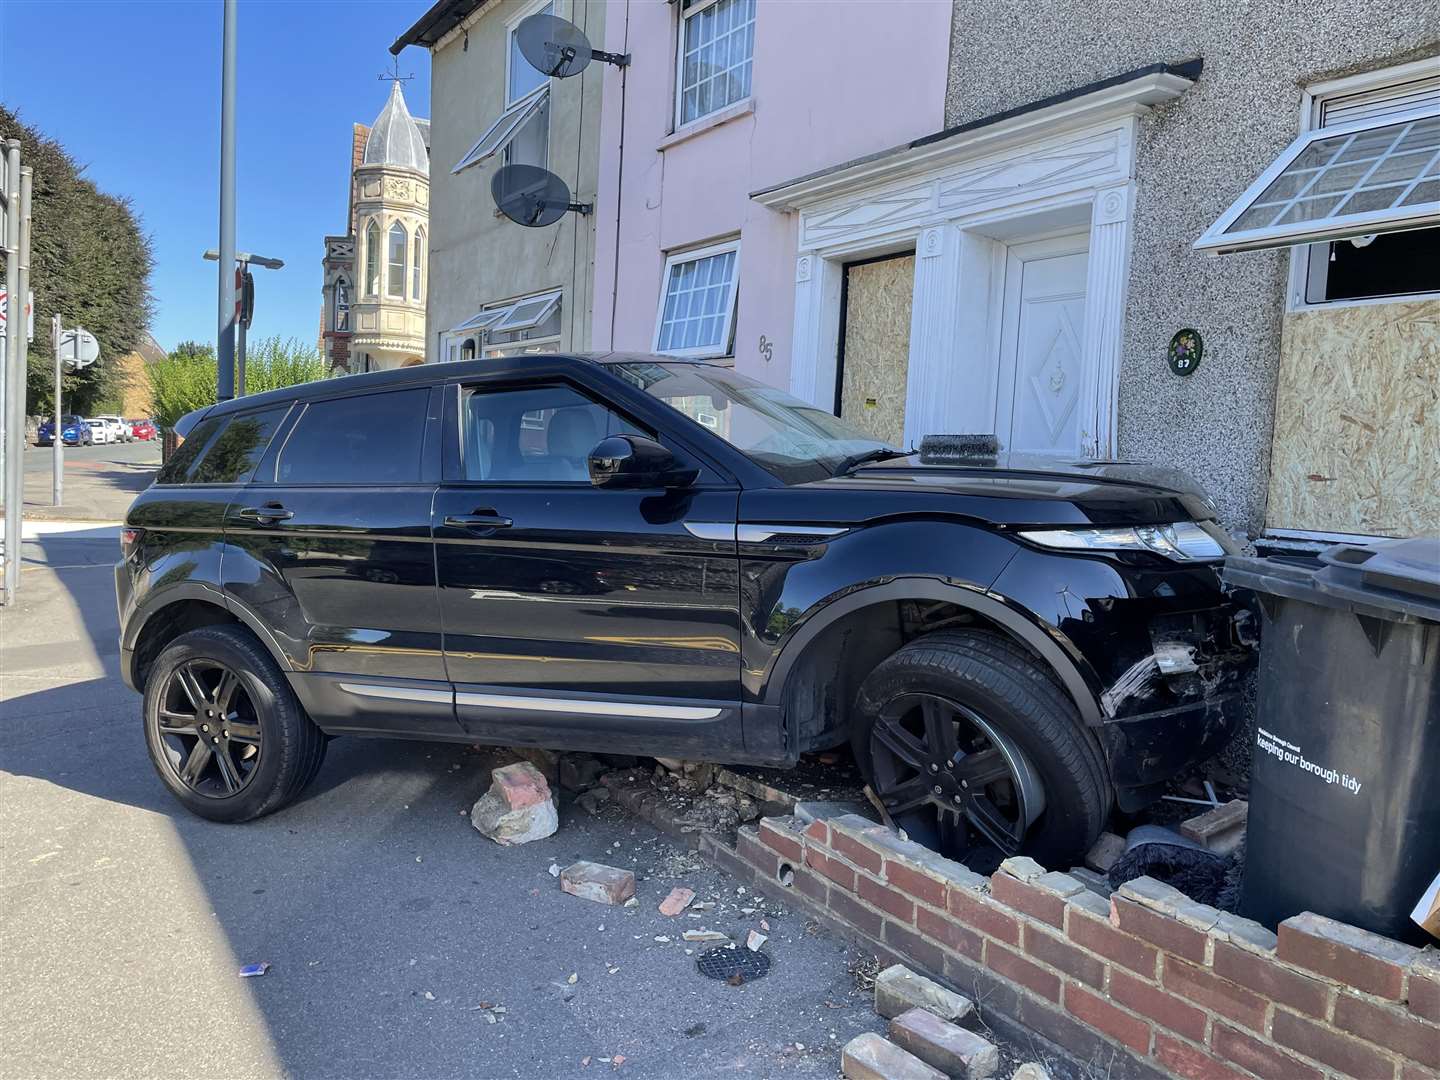 In August a suspected drunk driver ploughed a Range Rover into the same set of homes in Lower Boxley Road